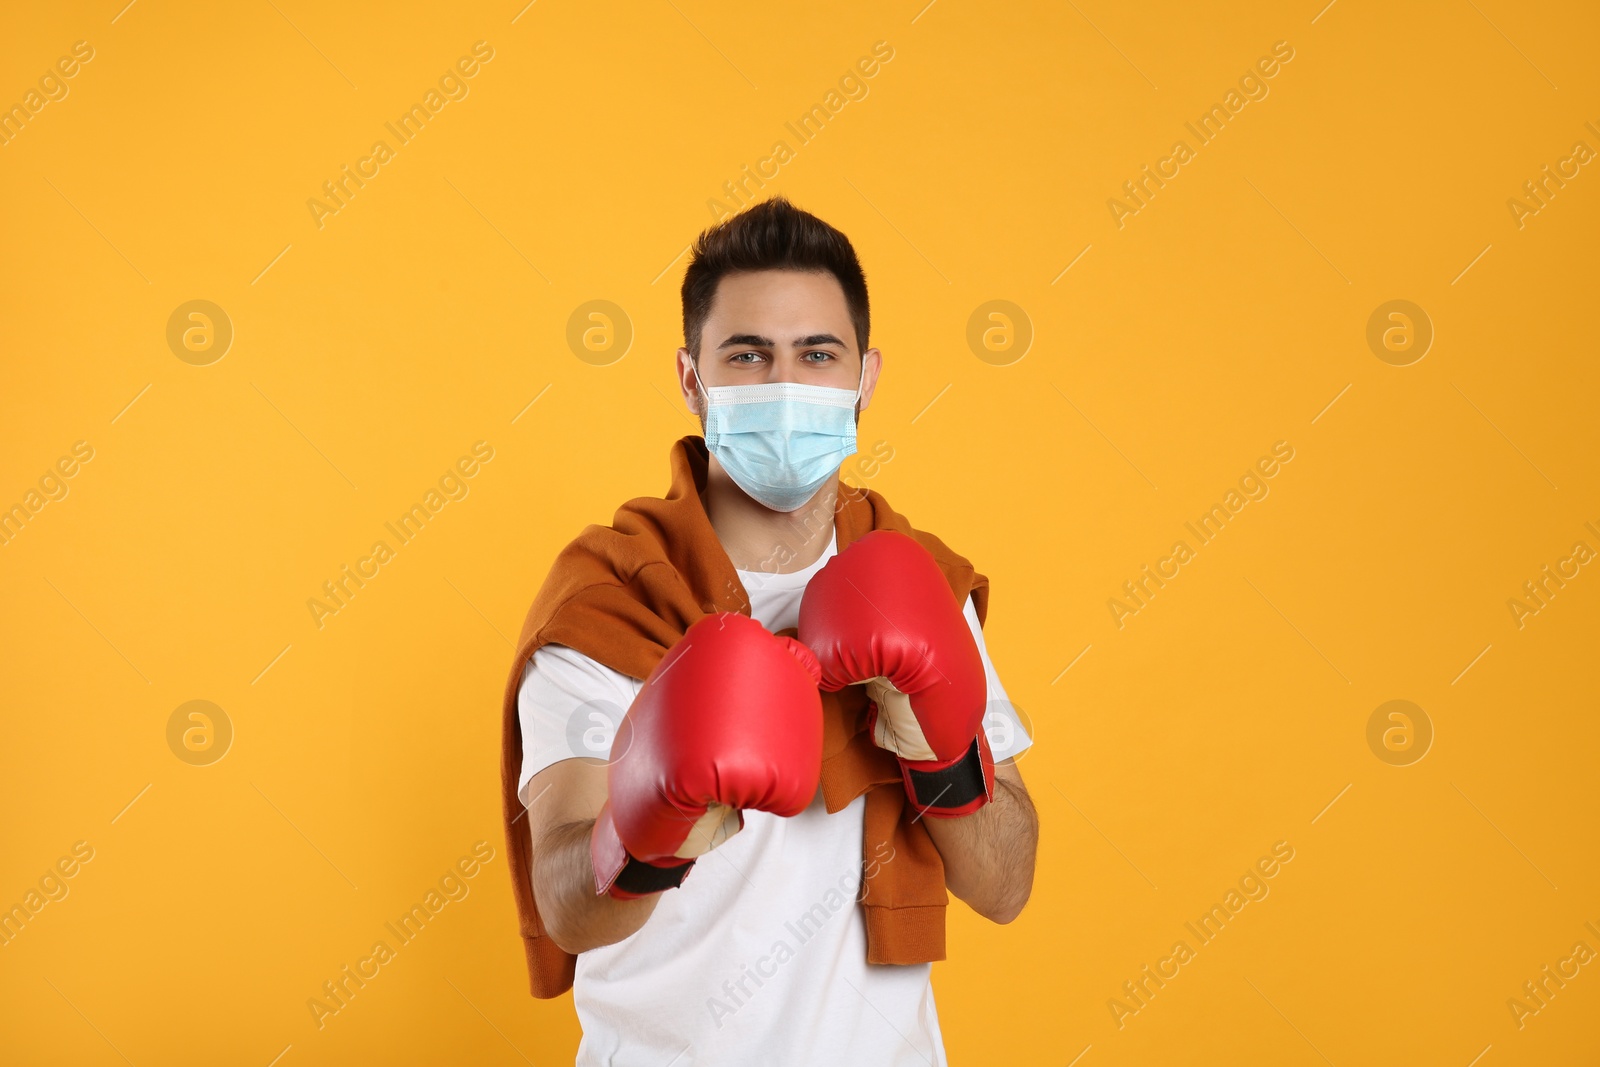 Photo of Man with protective mask and boxing gloves on yellow background. Strong immunity concept